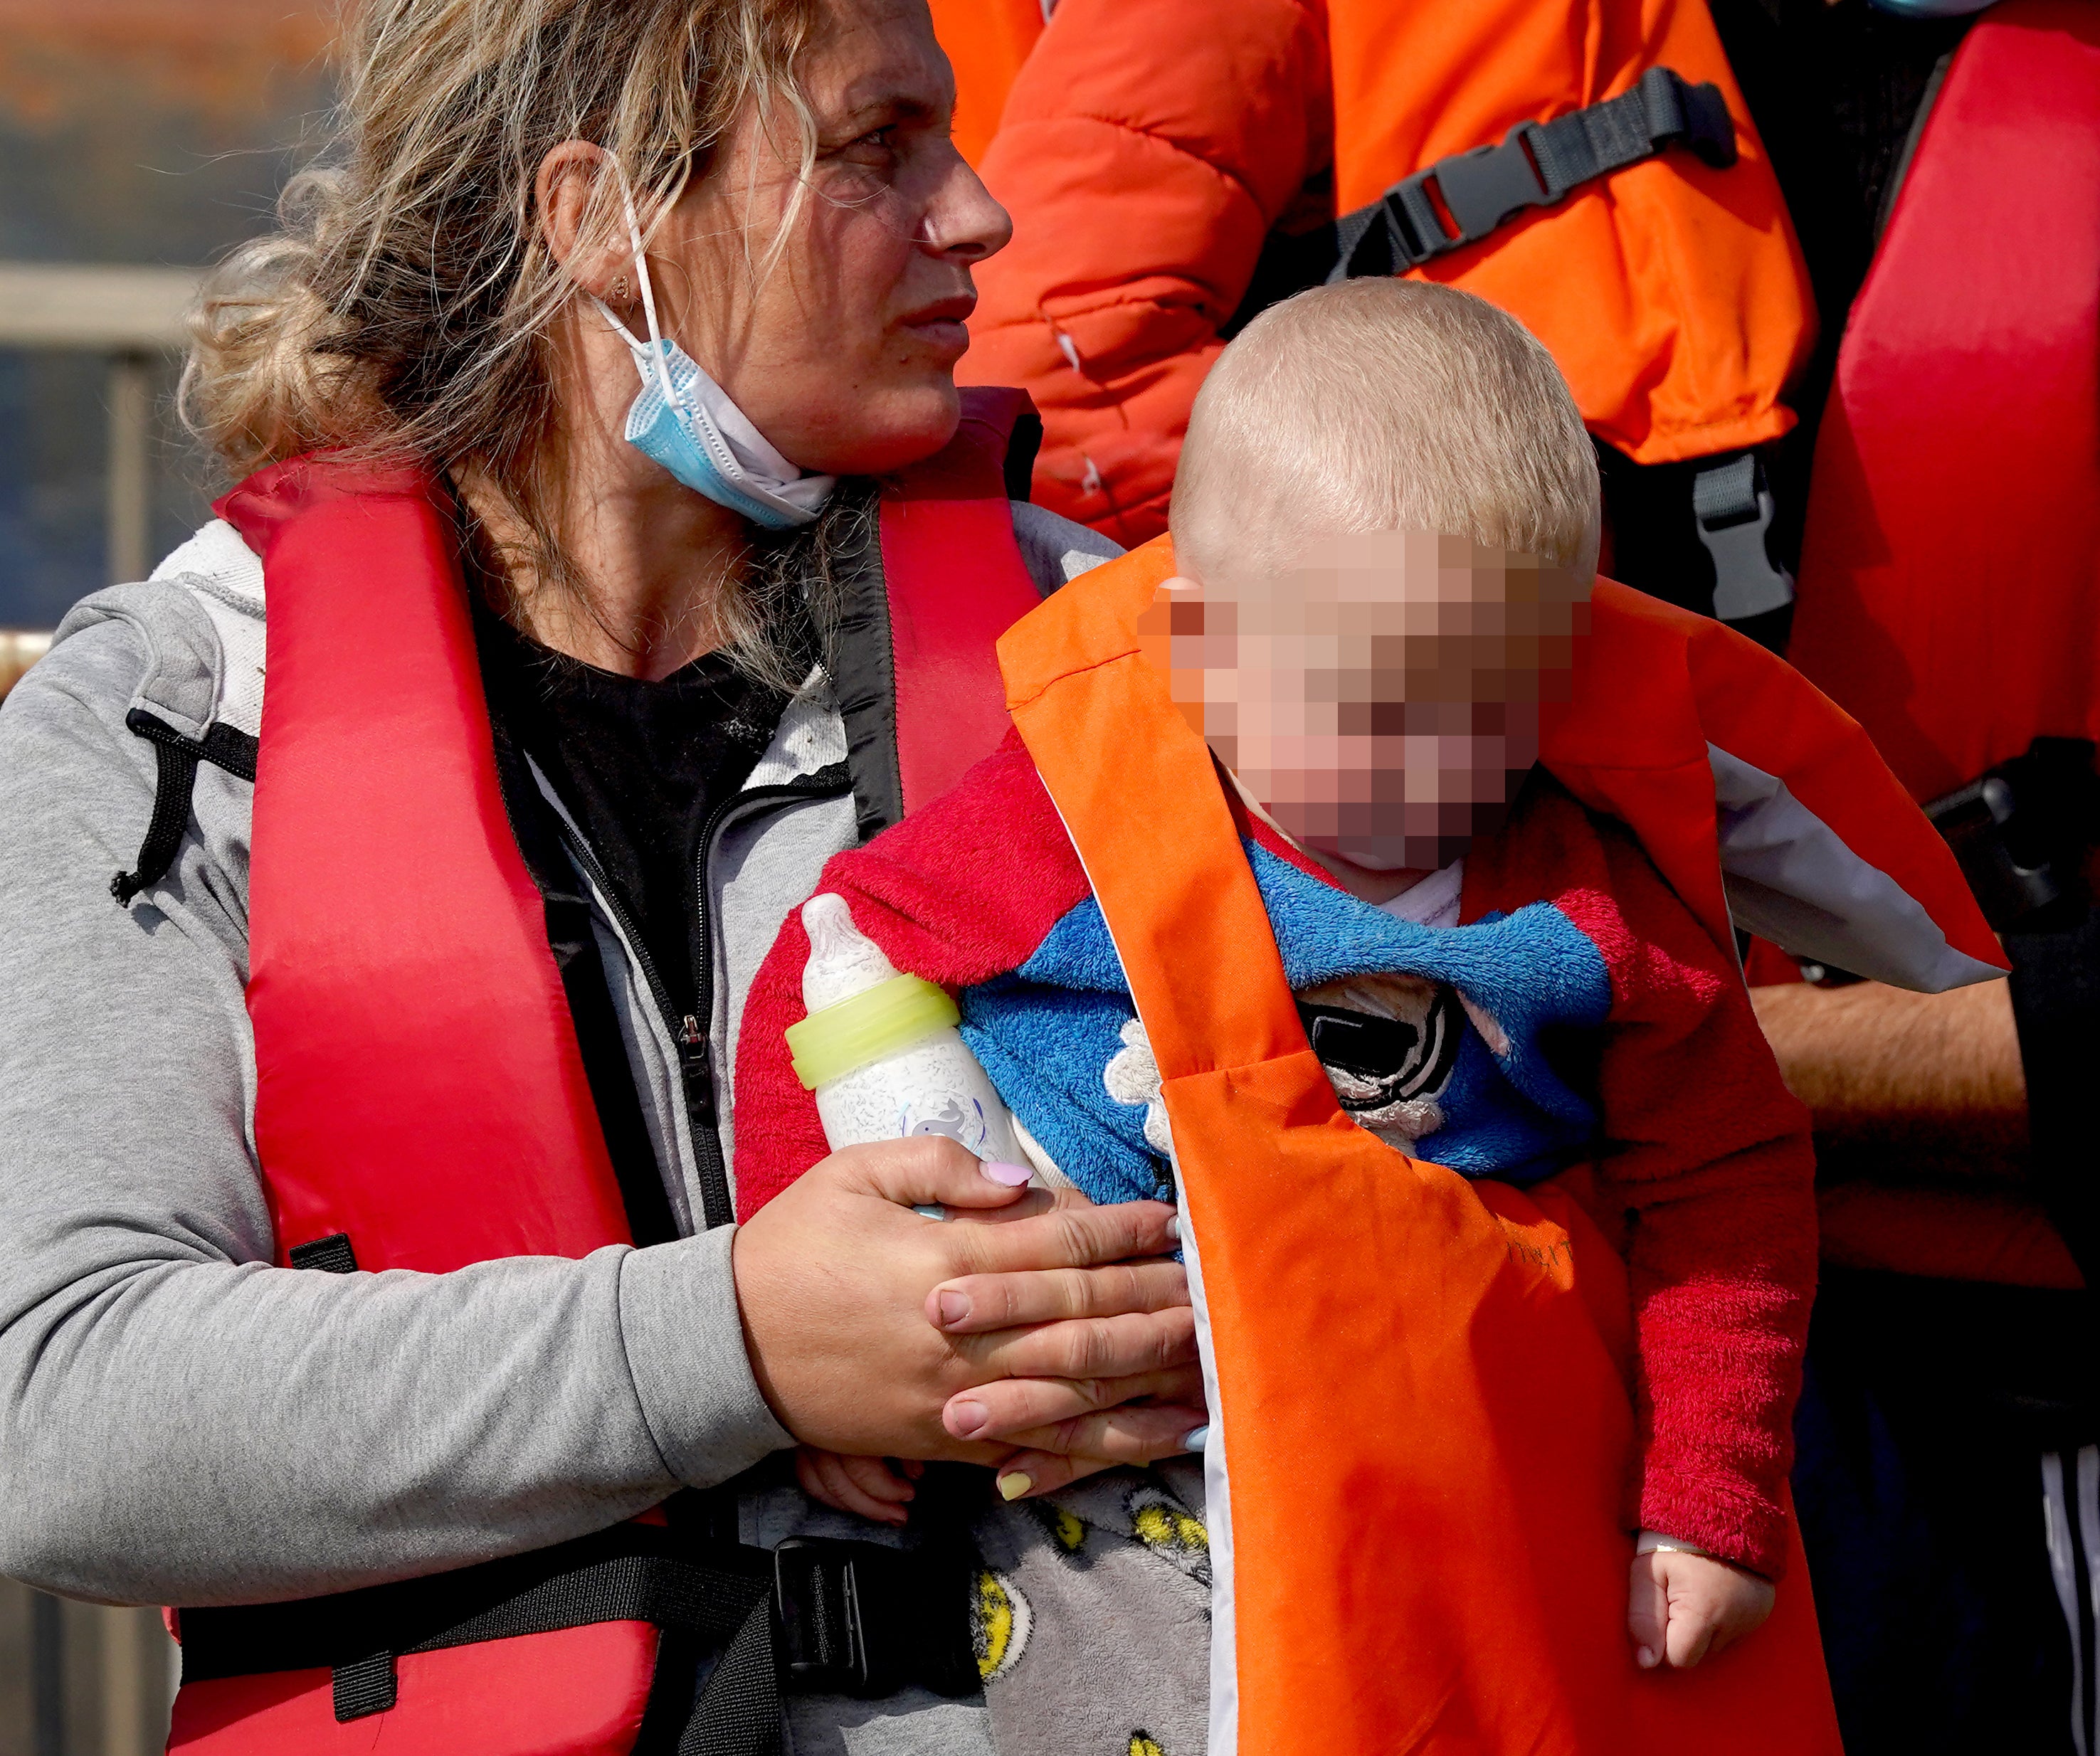 A young child in pyjamas was among the 221 people who made the crossing on Friday (Gareth Fuller/PA)